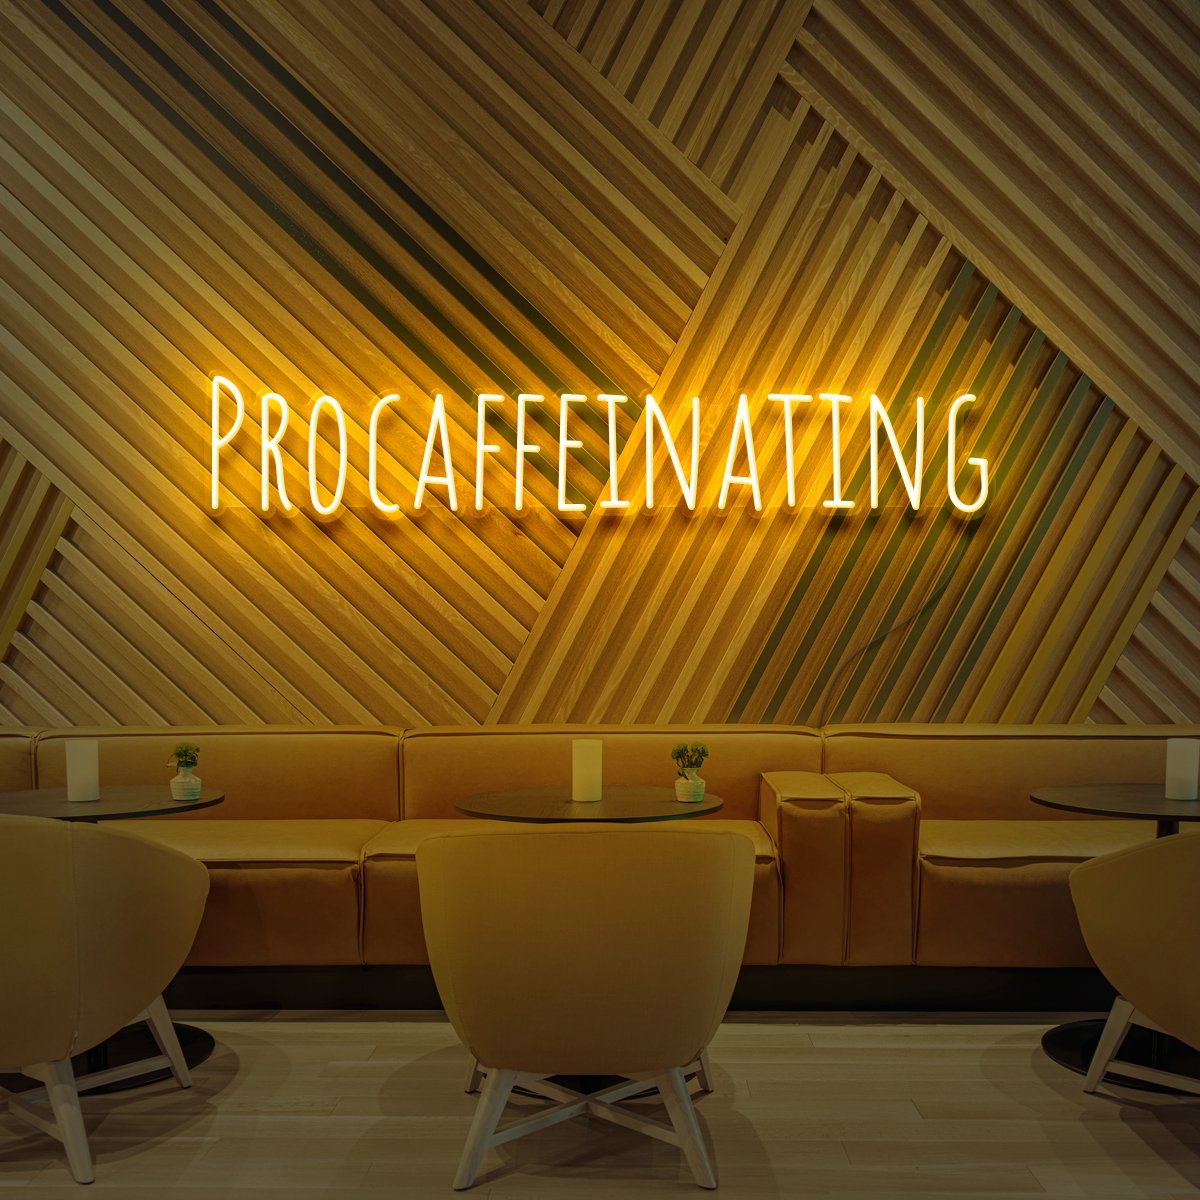 "Procaffeinating" Neon Sign for Cafés by Neon Icons